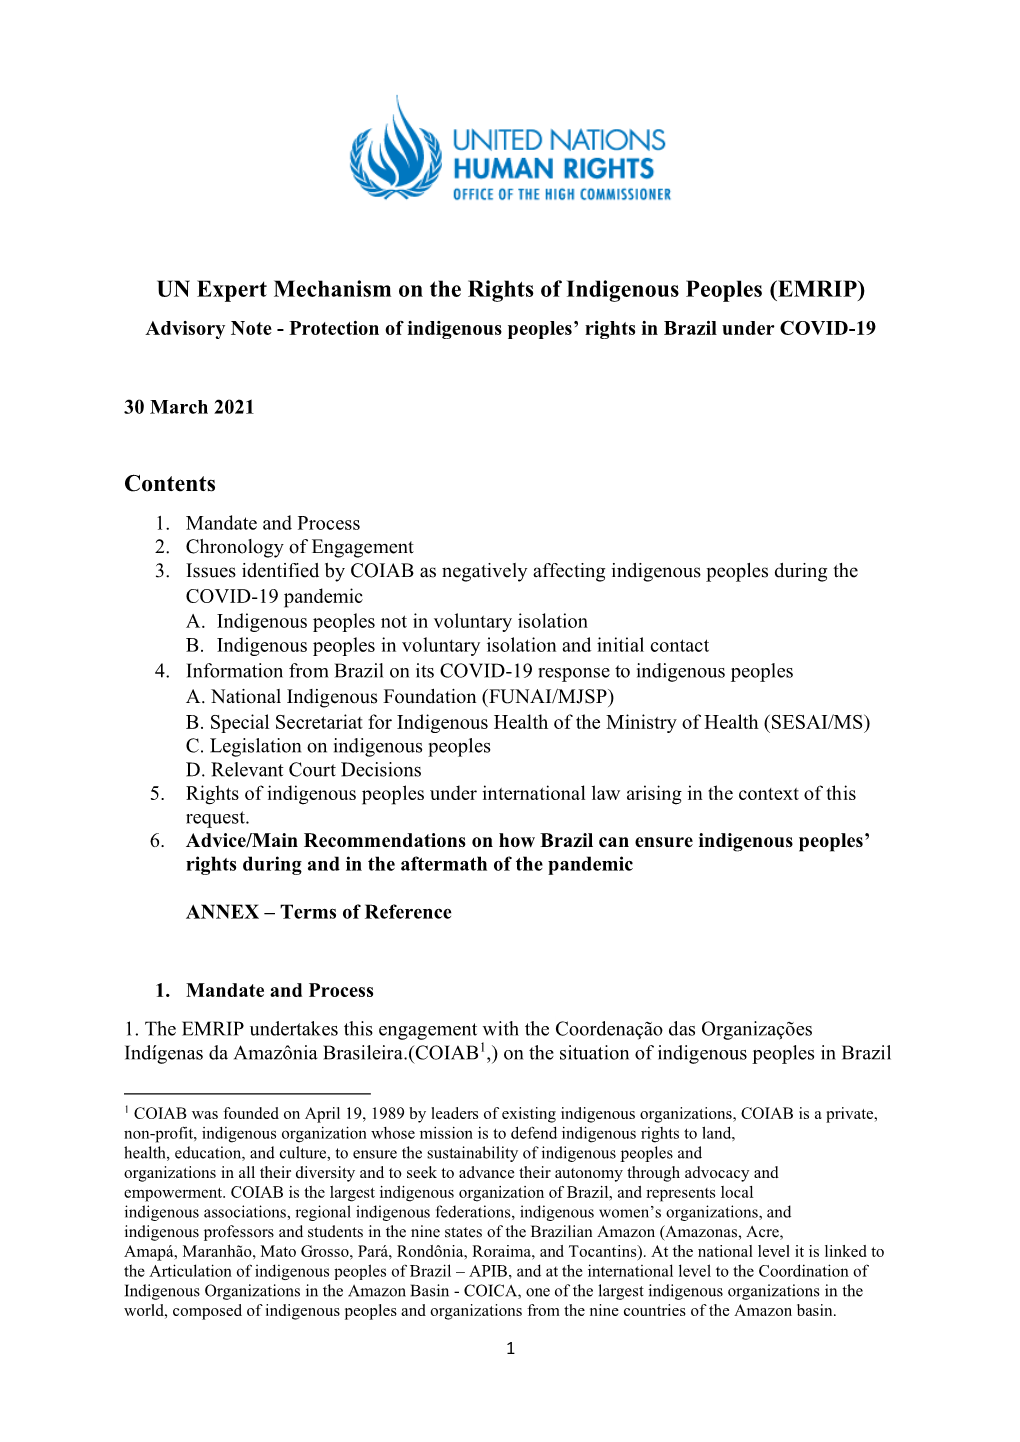 UN Expert Mechanism on the Rights of Indigenous Peoples (EMRIP) Advisory Note - Protection of Indigenous Peoples’ Rights in Brazil Under COVID-19